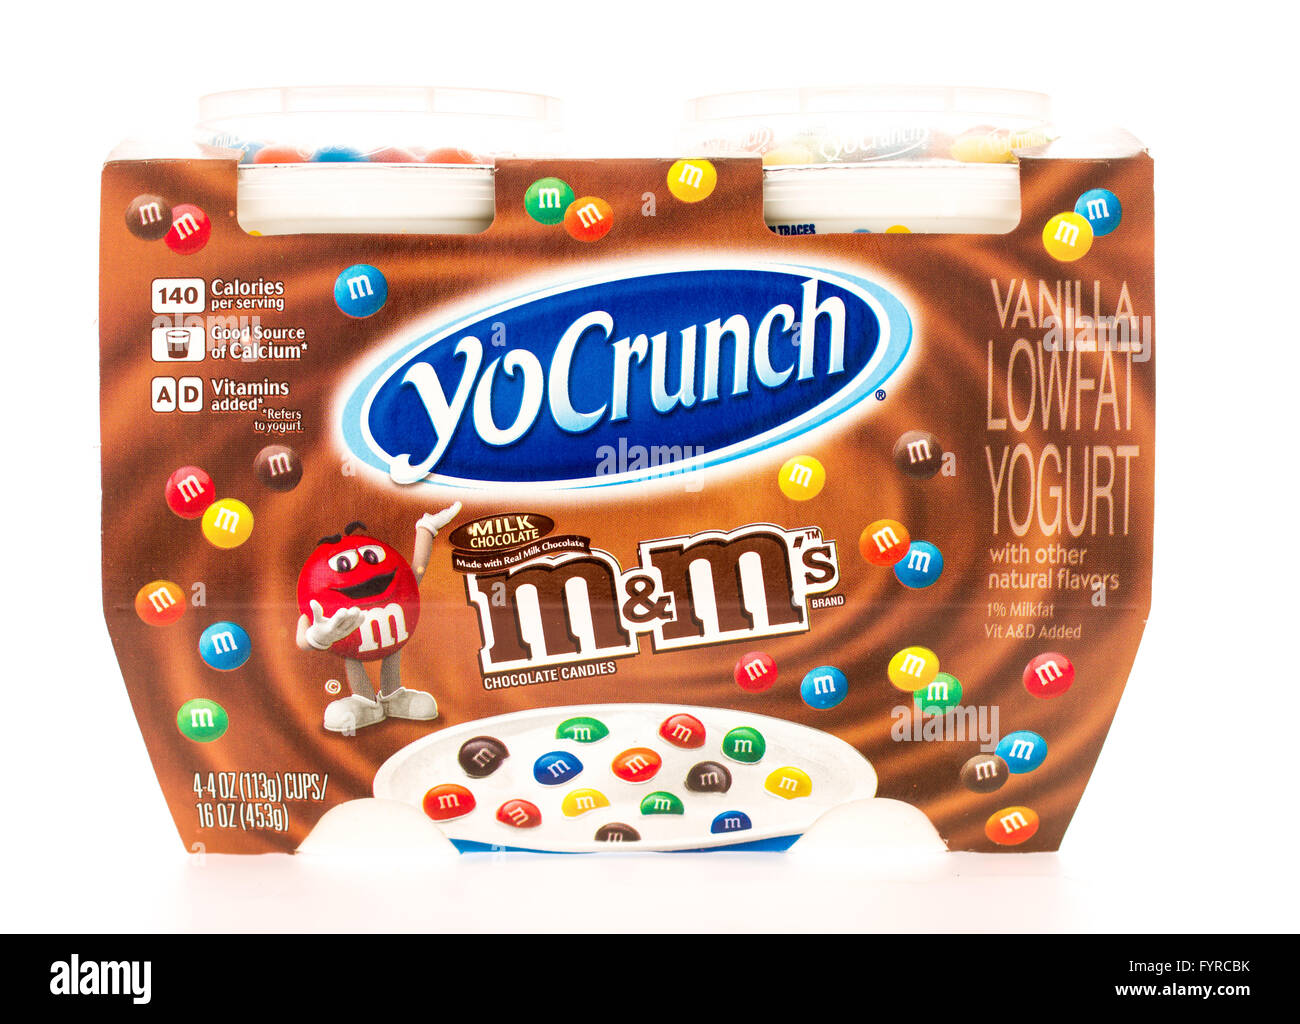 Winneconni, WI - 13 June 2015: Package of YoCrunch yogurt that contains M&M's Stock Photo